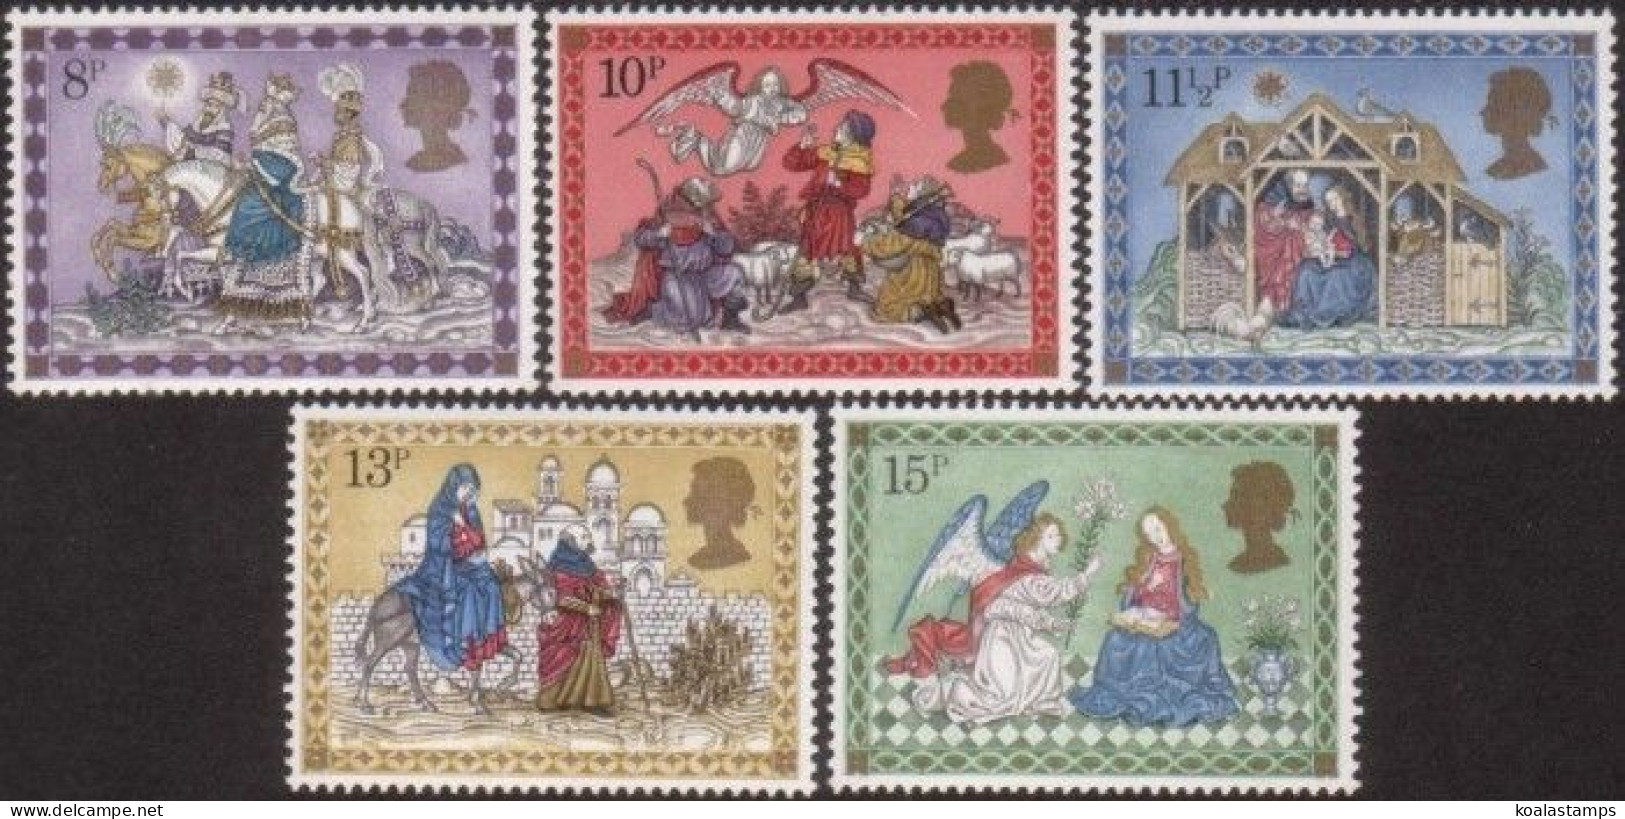 Great Britain 1979 SG1104-1108 Christmas Set MNH - Unclassified